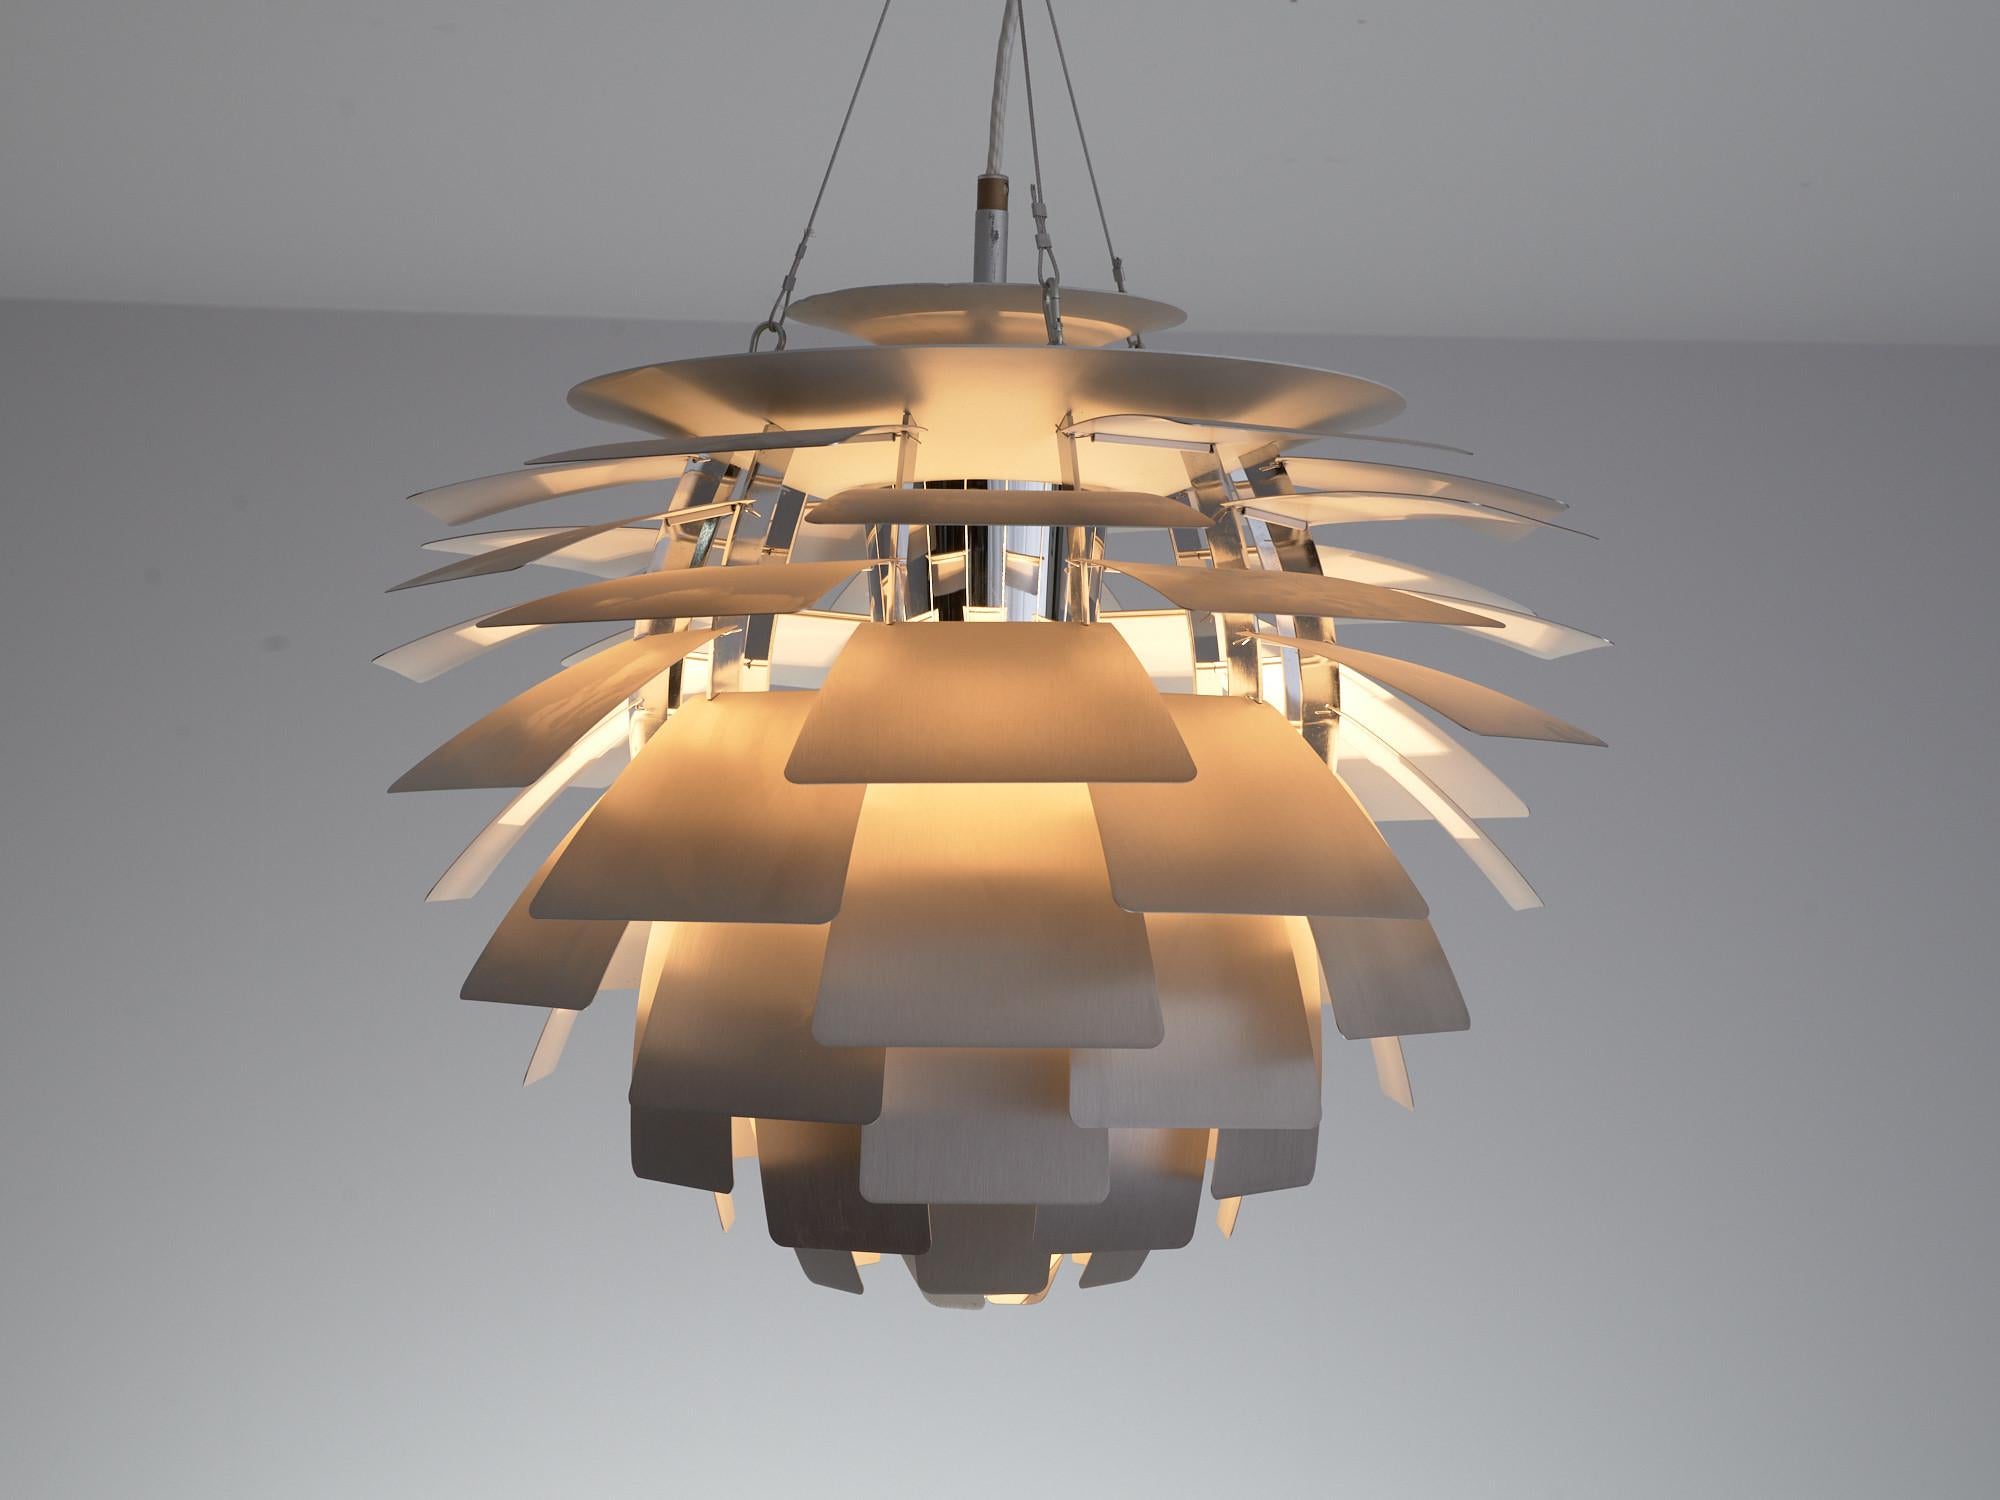 Poul Henningsen for Louis Poulsen, 'PH-Artichoke' pendant, stainless steel Denmark, design 1957, production 1970s.

The Artichoke pendant is an all time favorite in the lighting design. This iconic pendant, designed by Poul Henningsen, displays